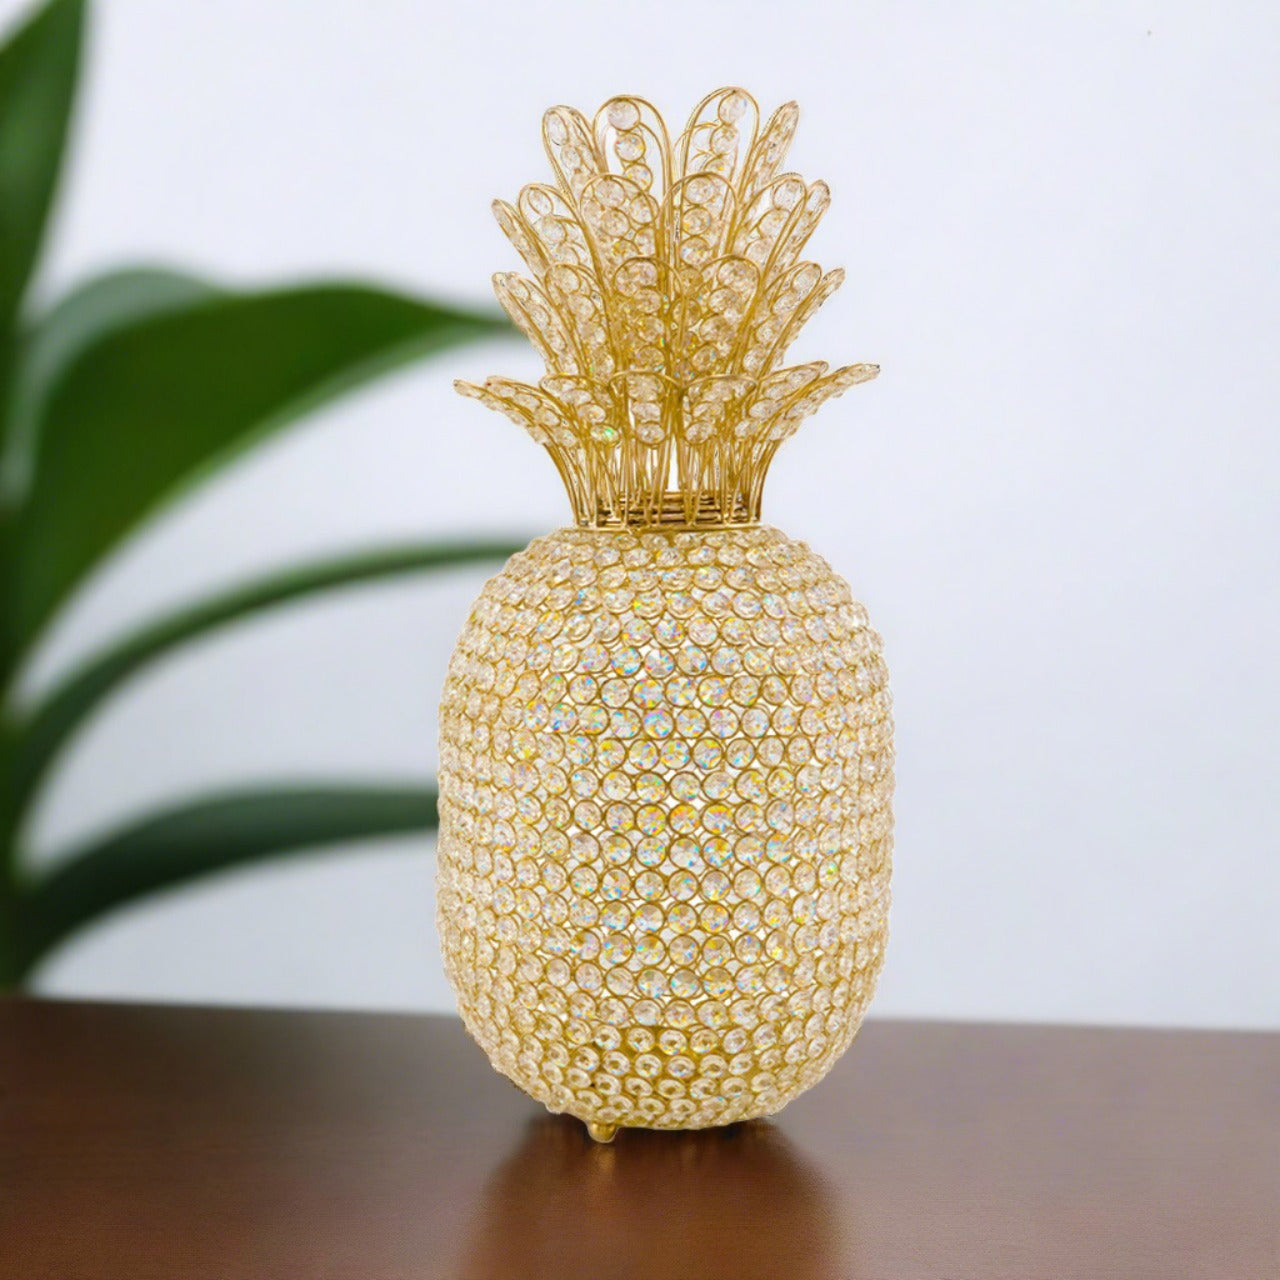 Pina Large Crystal Pineapple Decor, Gold or Silver